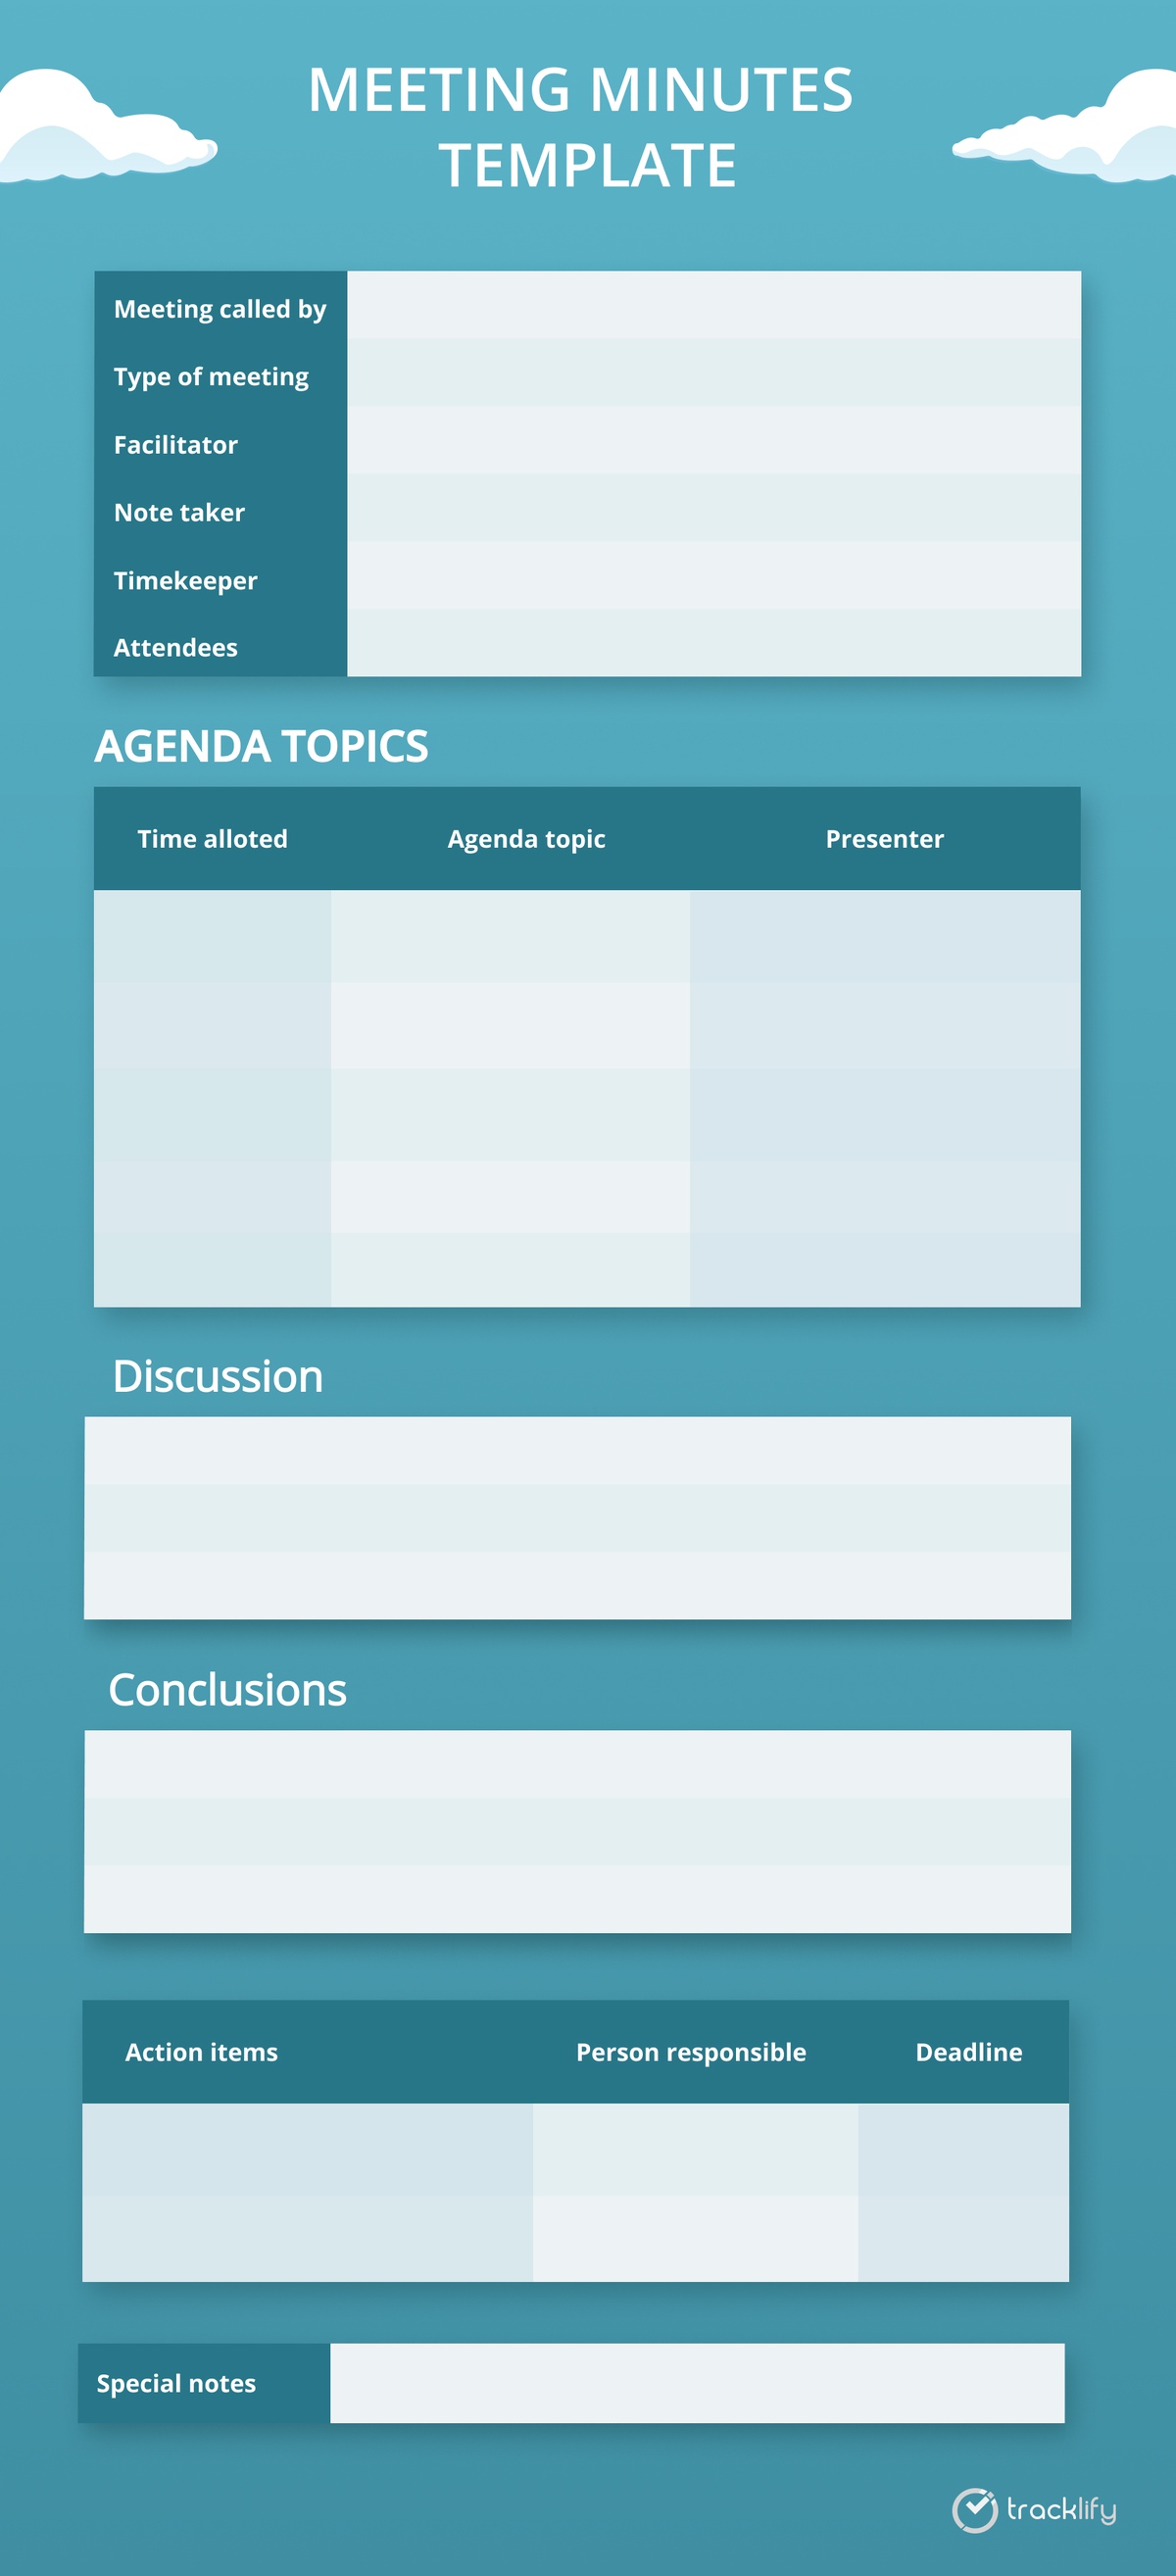 Meeting minutes template